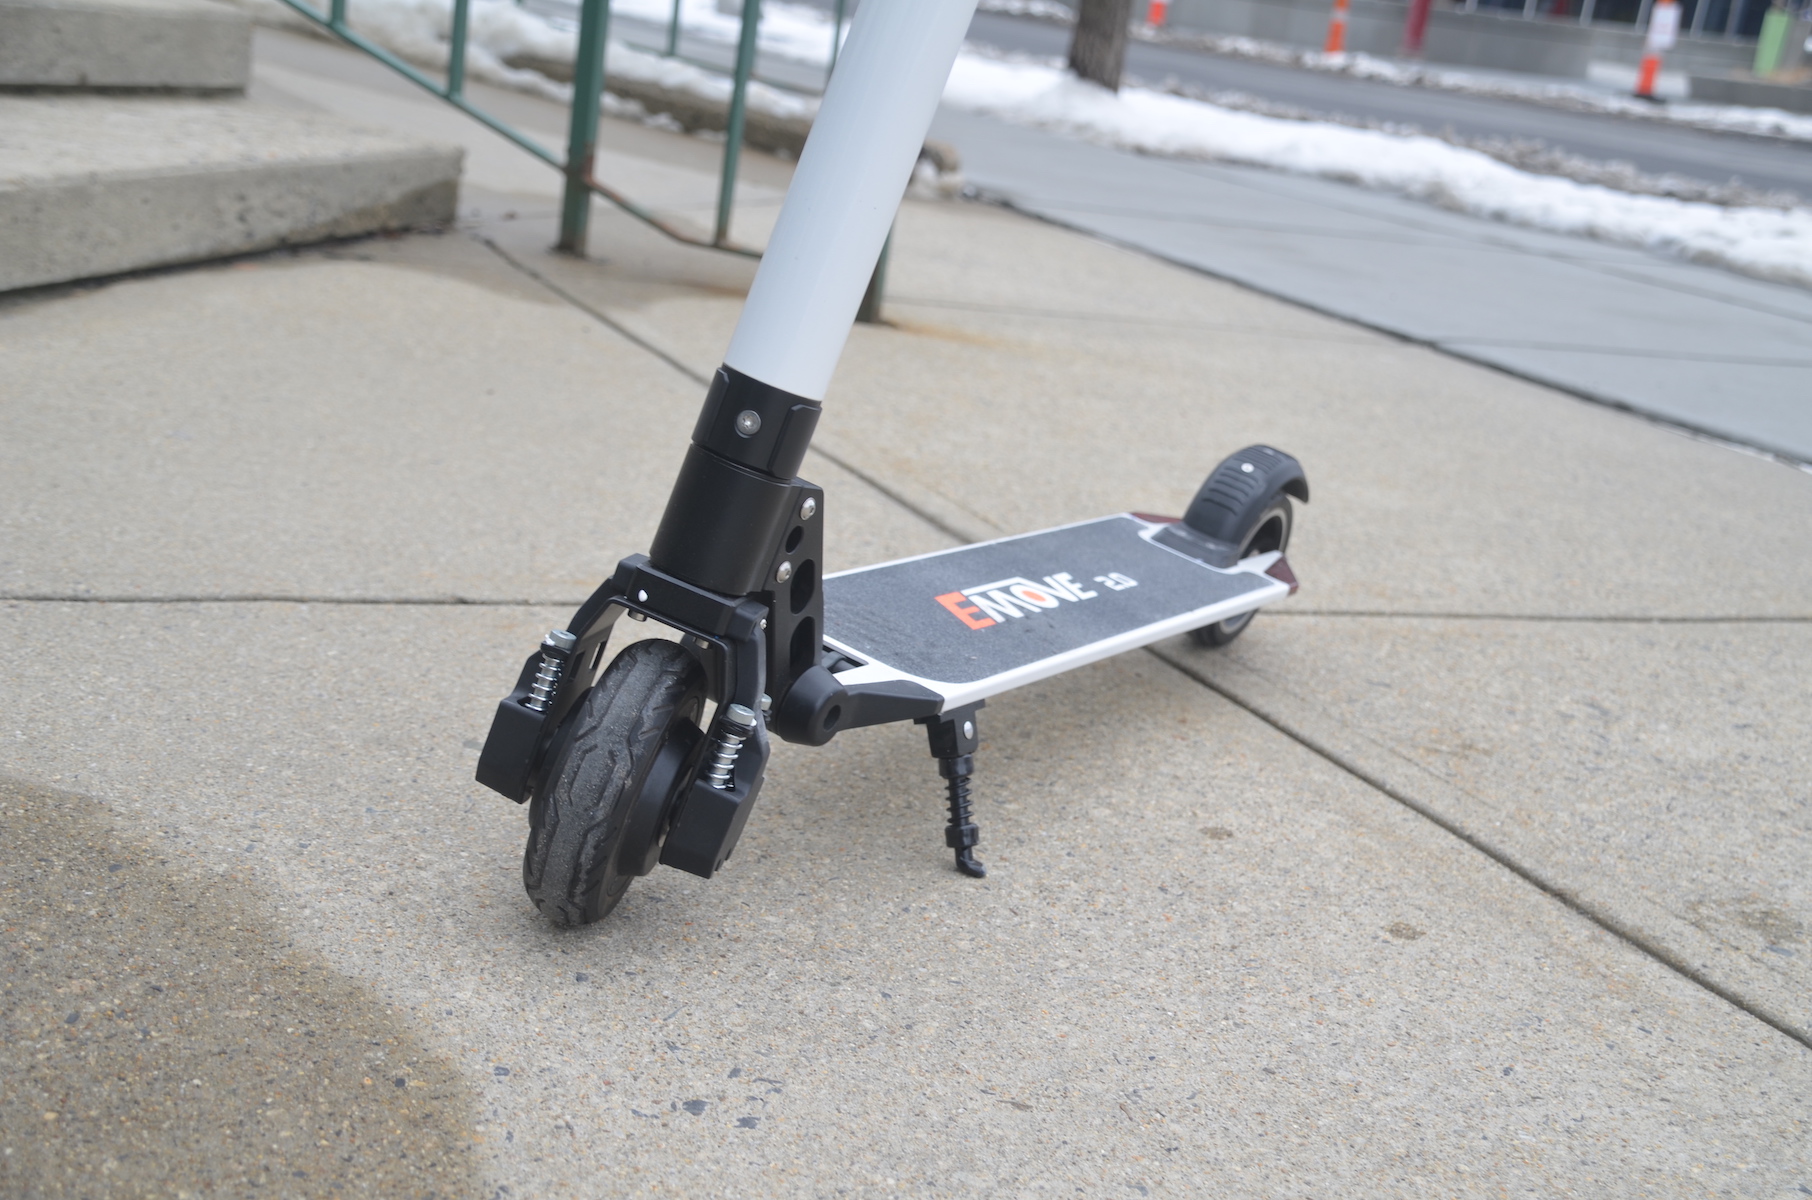 lightest electric scooter 2019